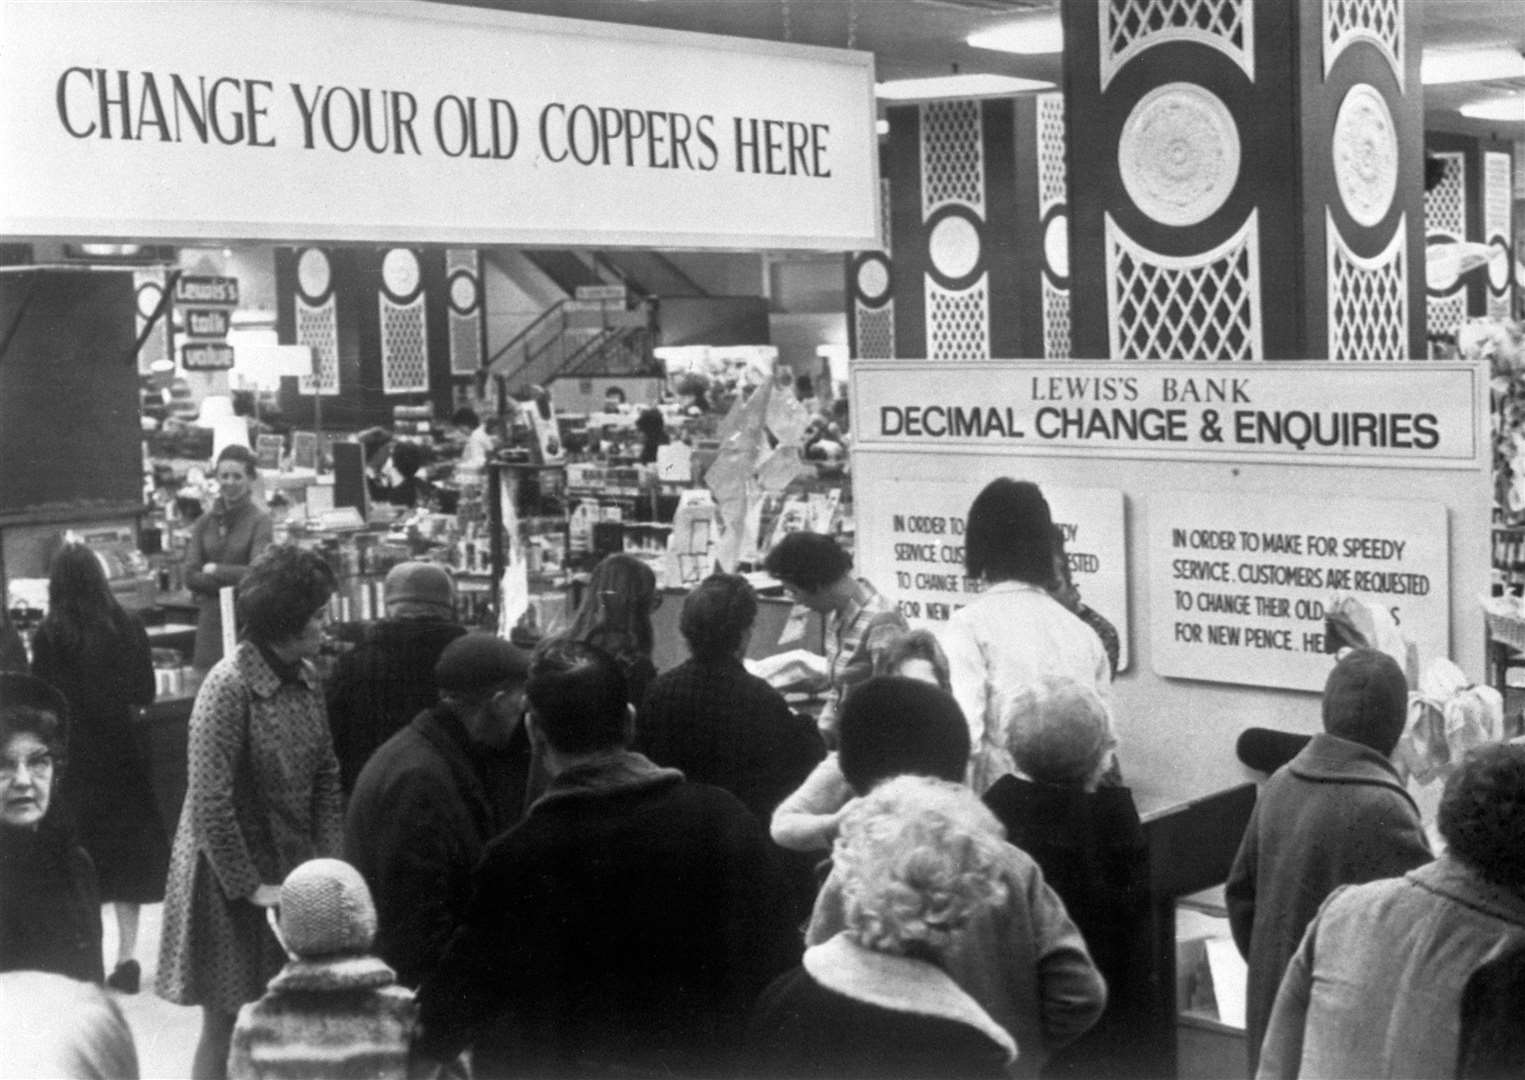 The banking section of Lewis’s department store in Manchester changes old coins in 1971 (PA)